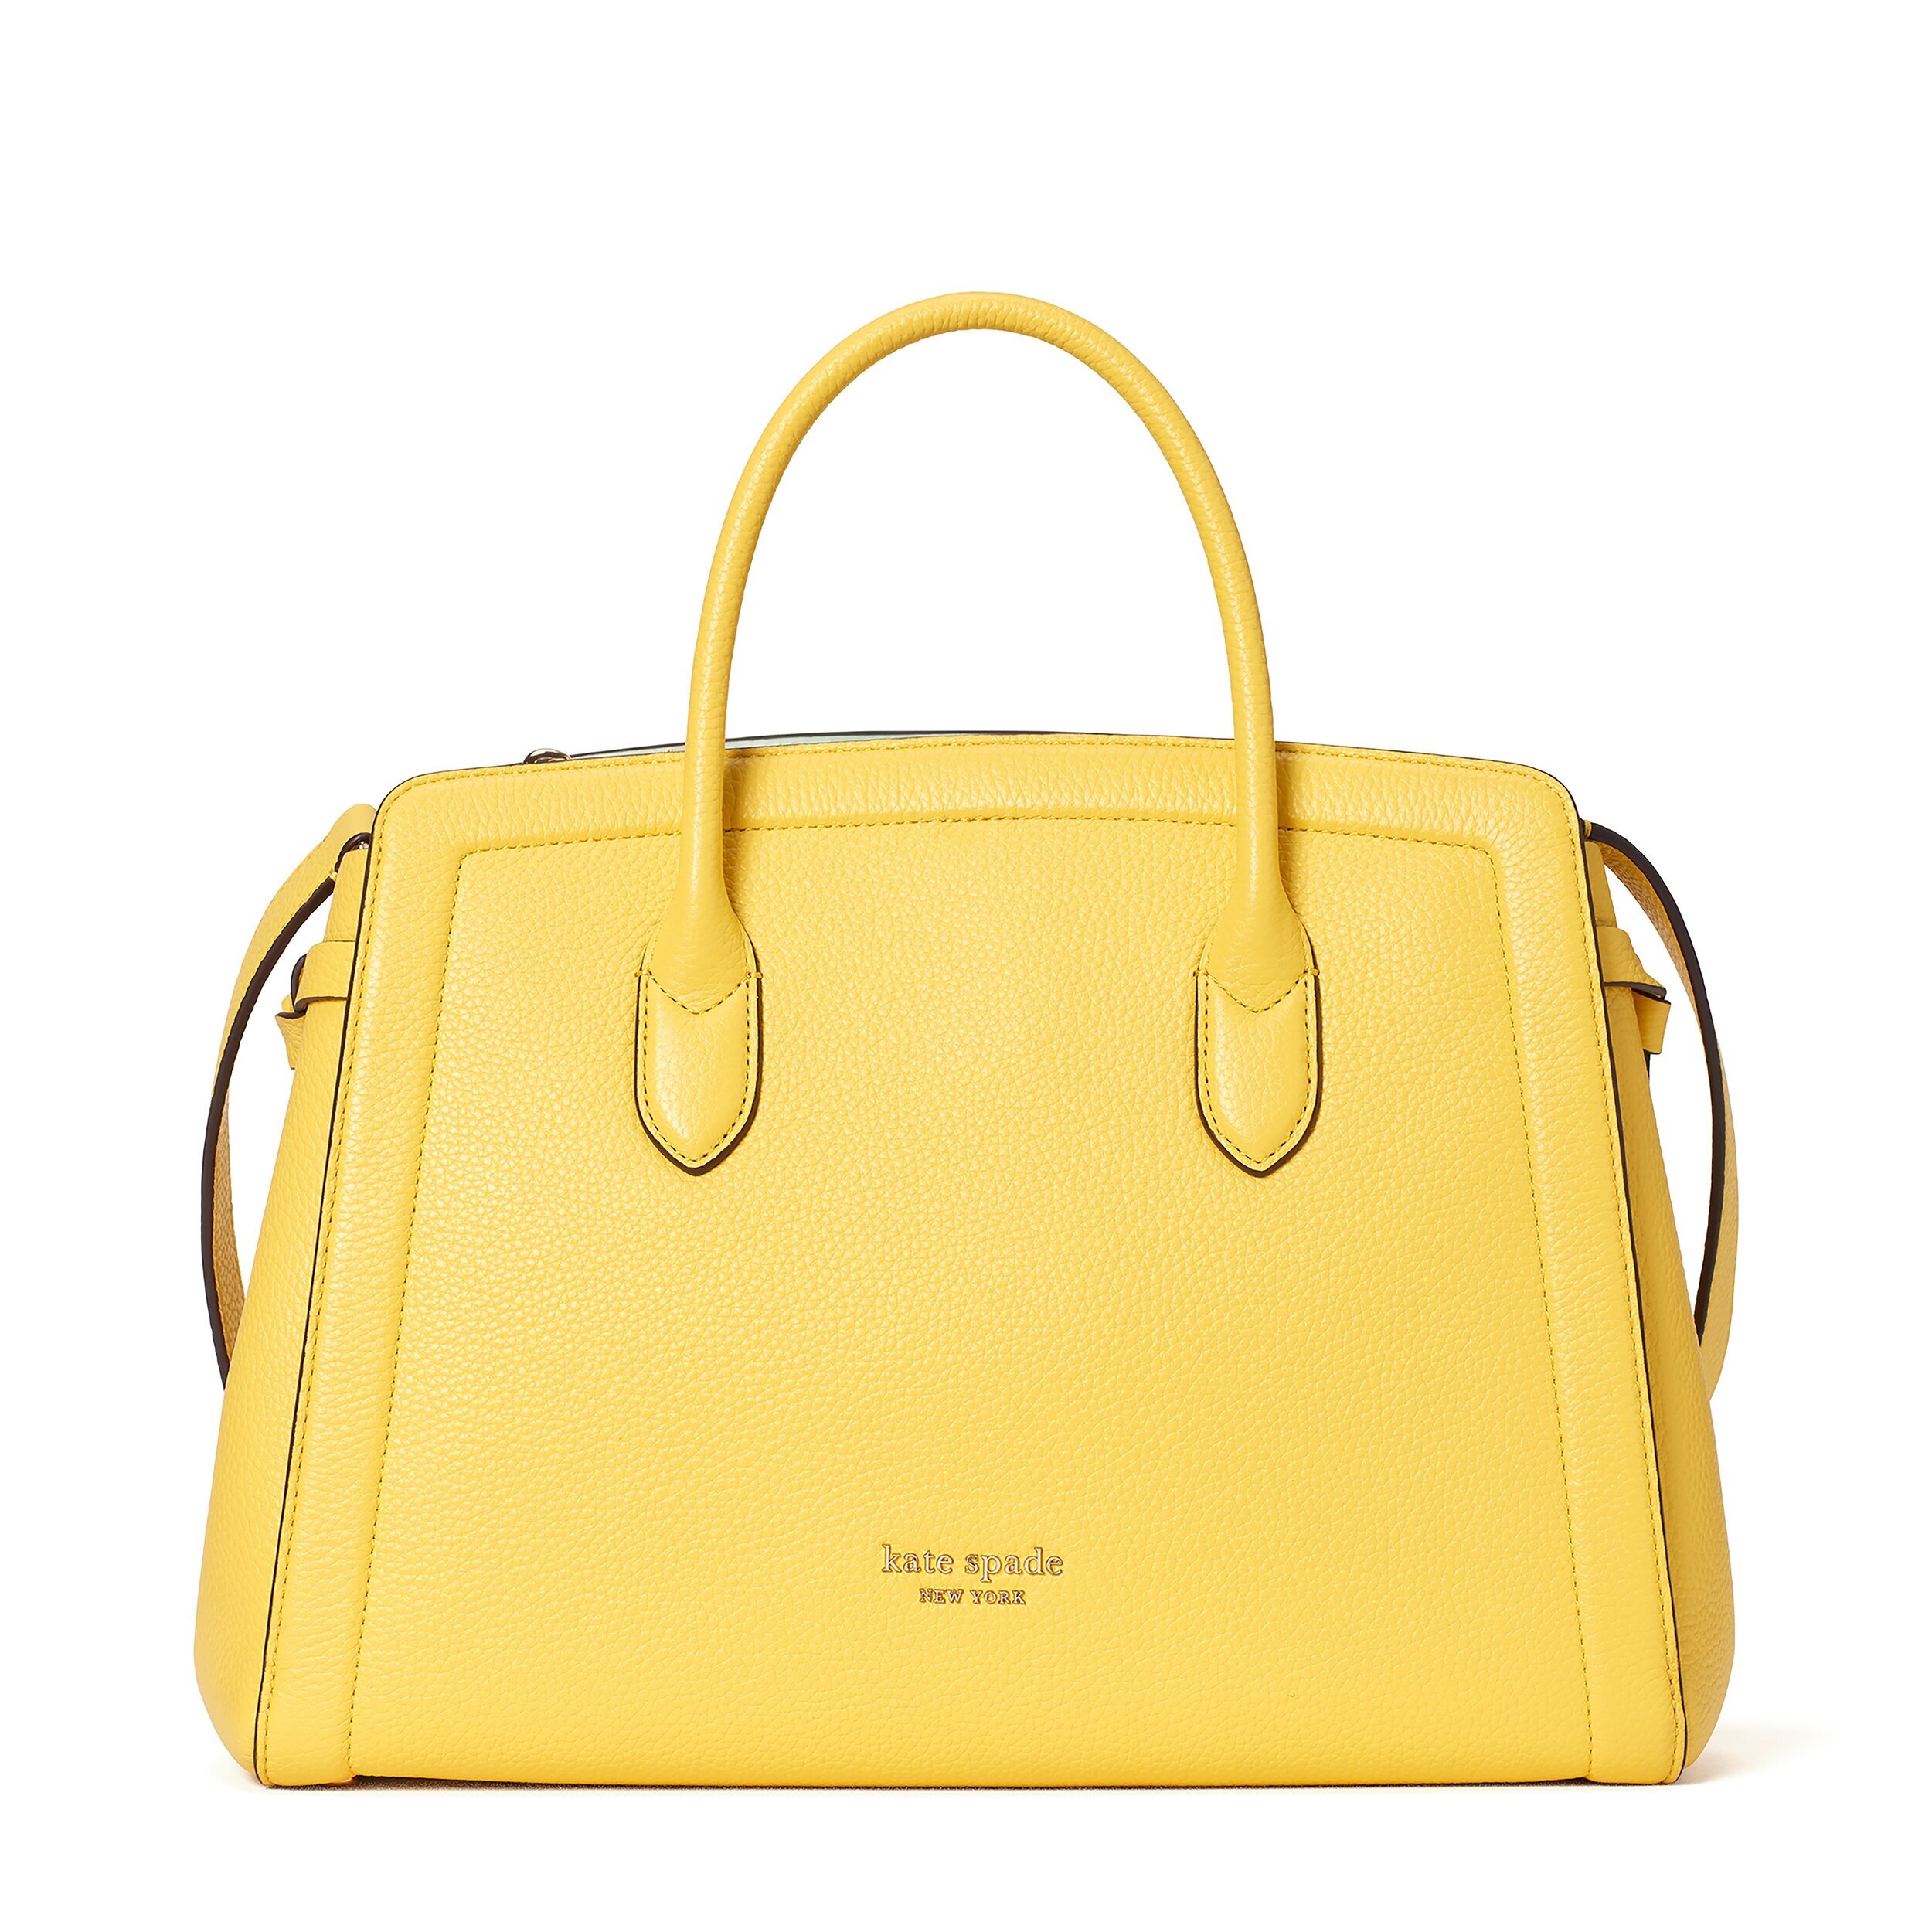 Kate Spade New York Launches The Knott Handbag For Spring 2021 A Modern ...